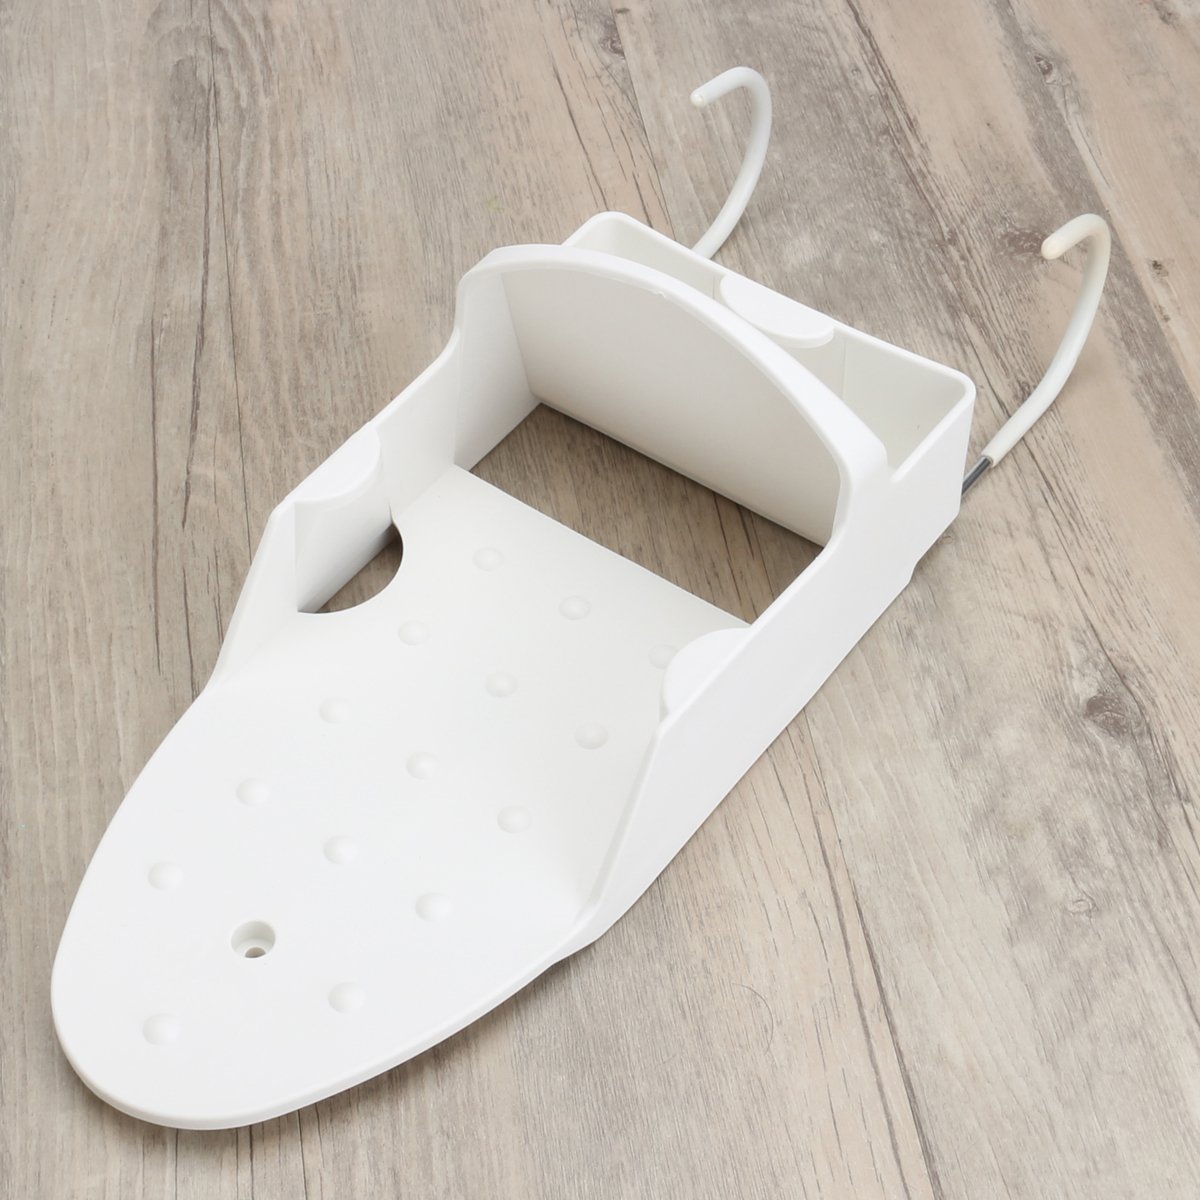 White/Black Ironing Board Storage Over The Door Hook Iron Holder Home Laundry Wall Mounted Rack Hotel